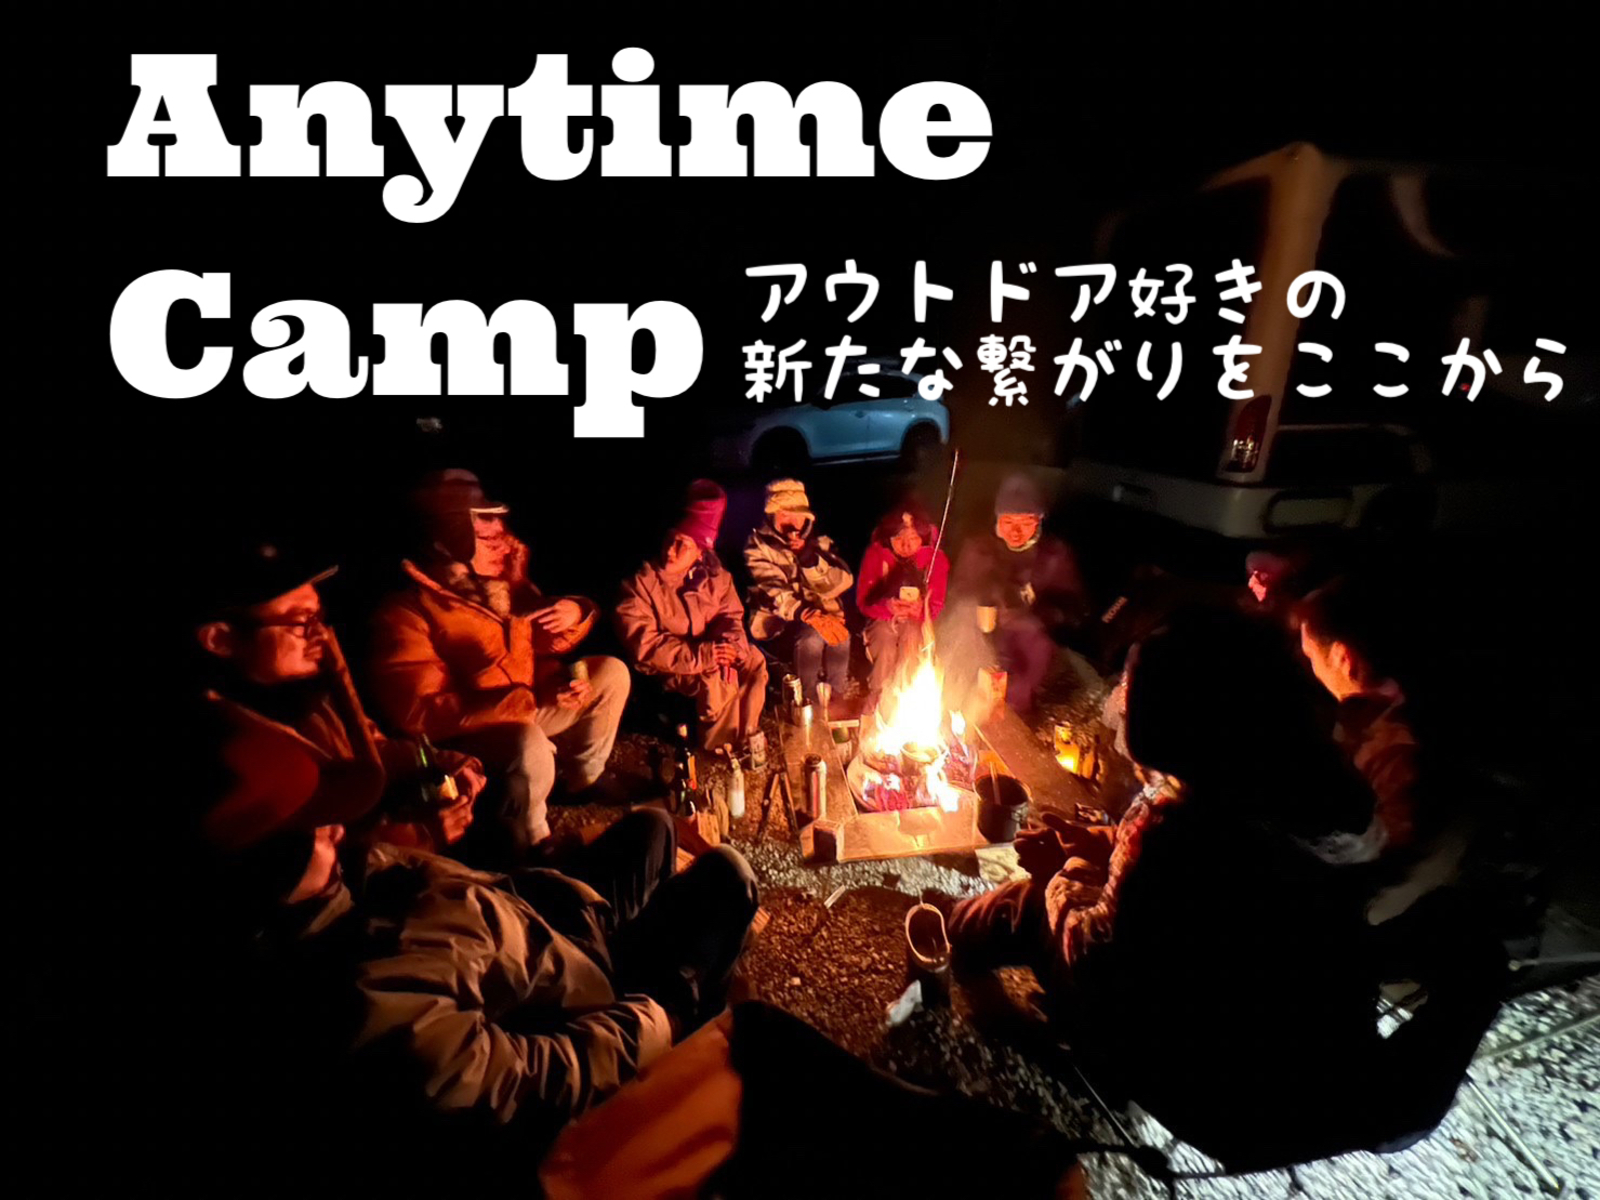 Anytime camp